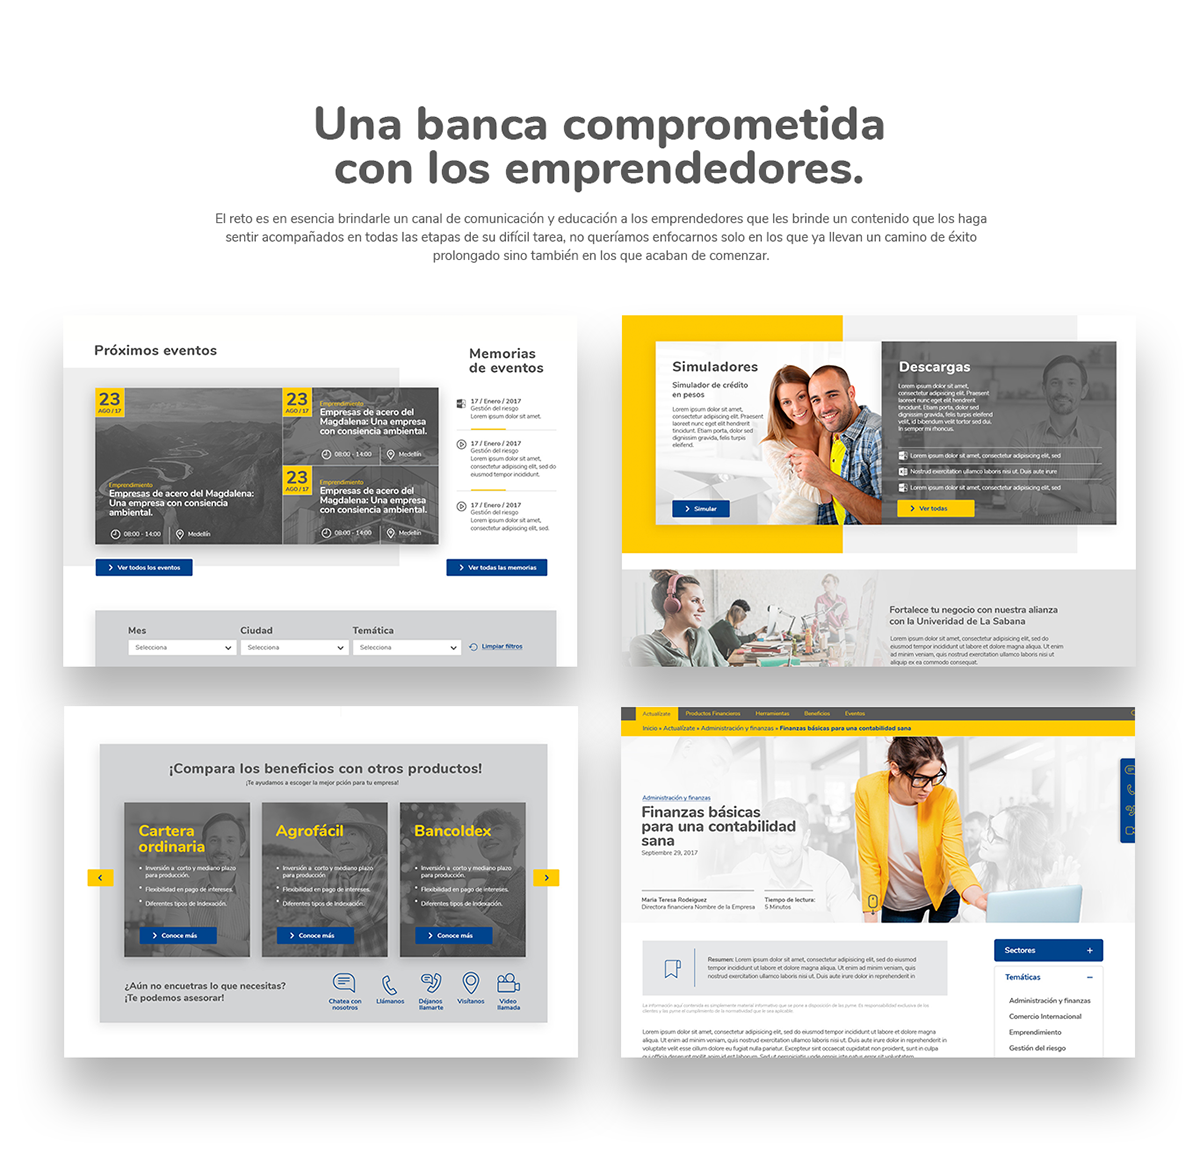 user experience user interface design Bank financial material design bancolombia motion graphics  minimalist yellow